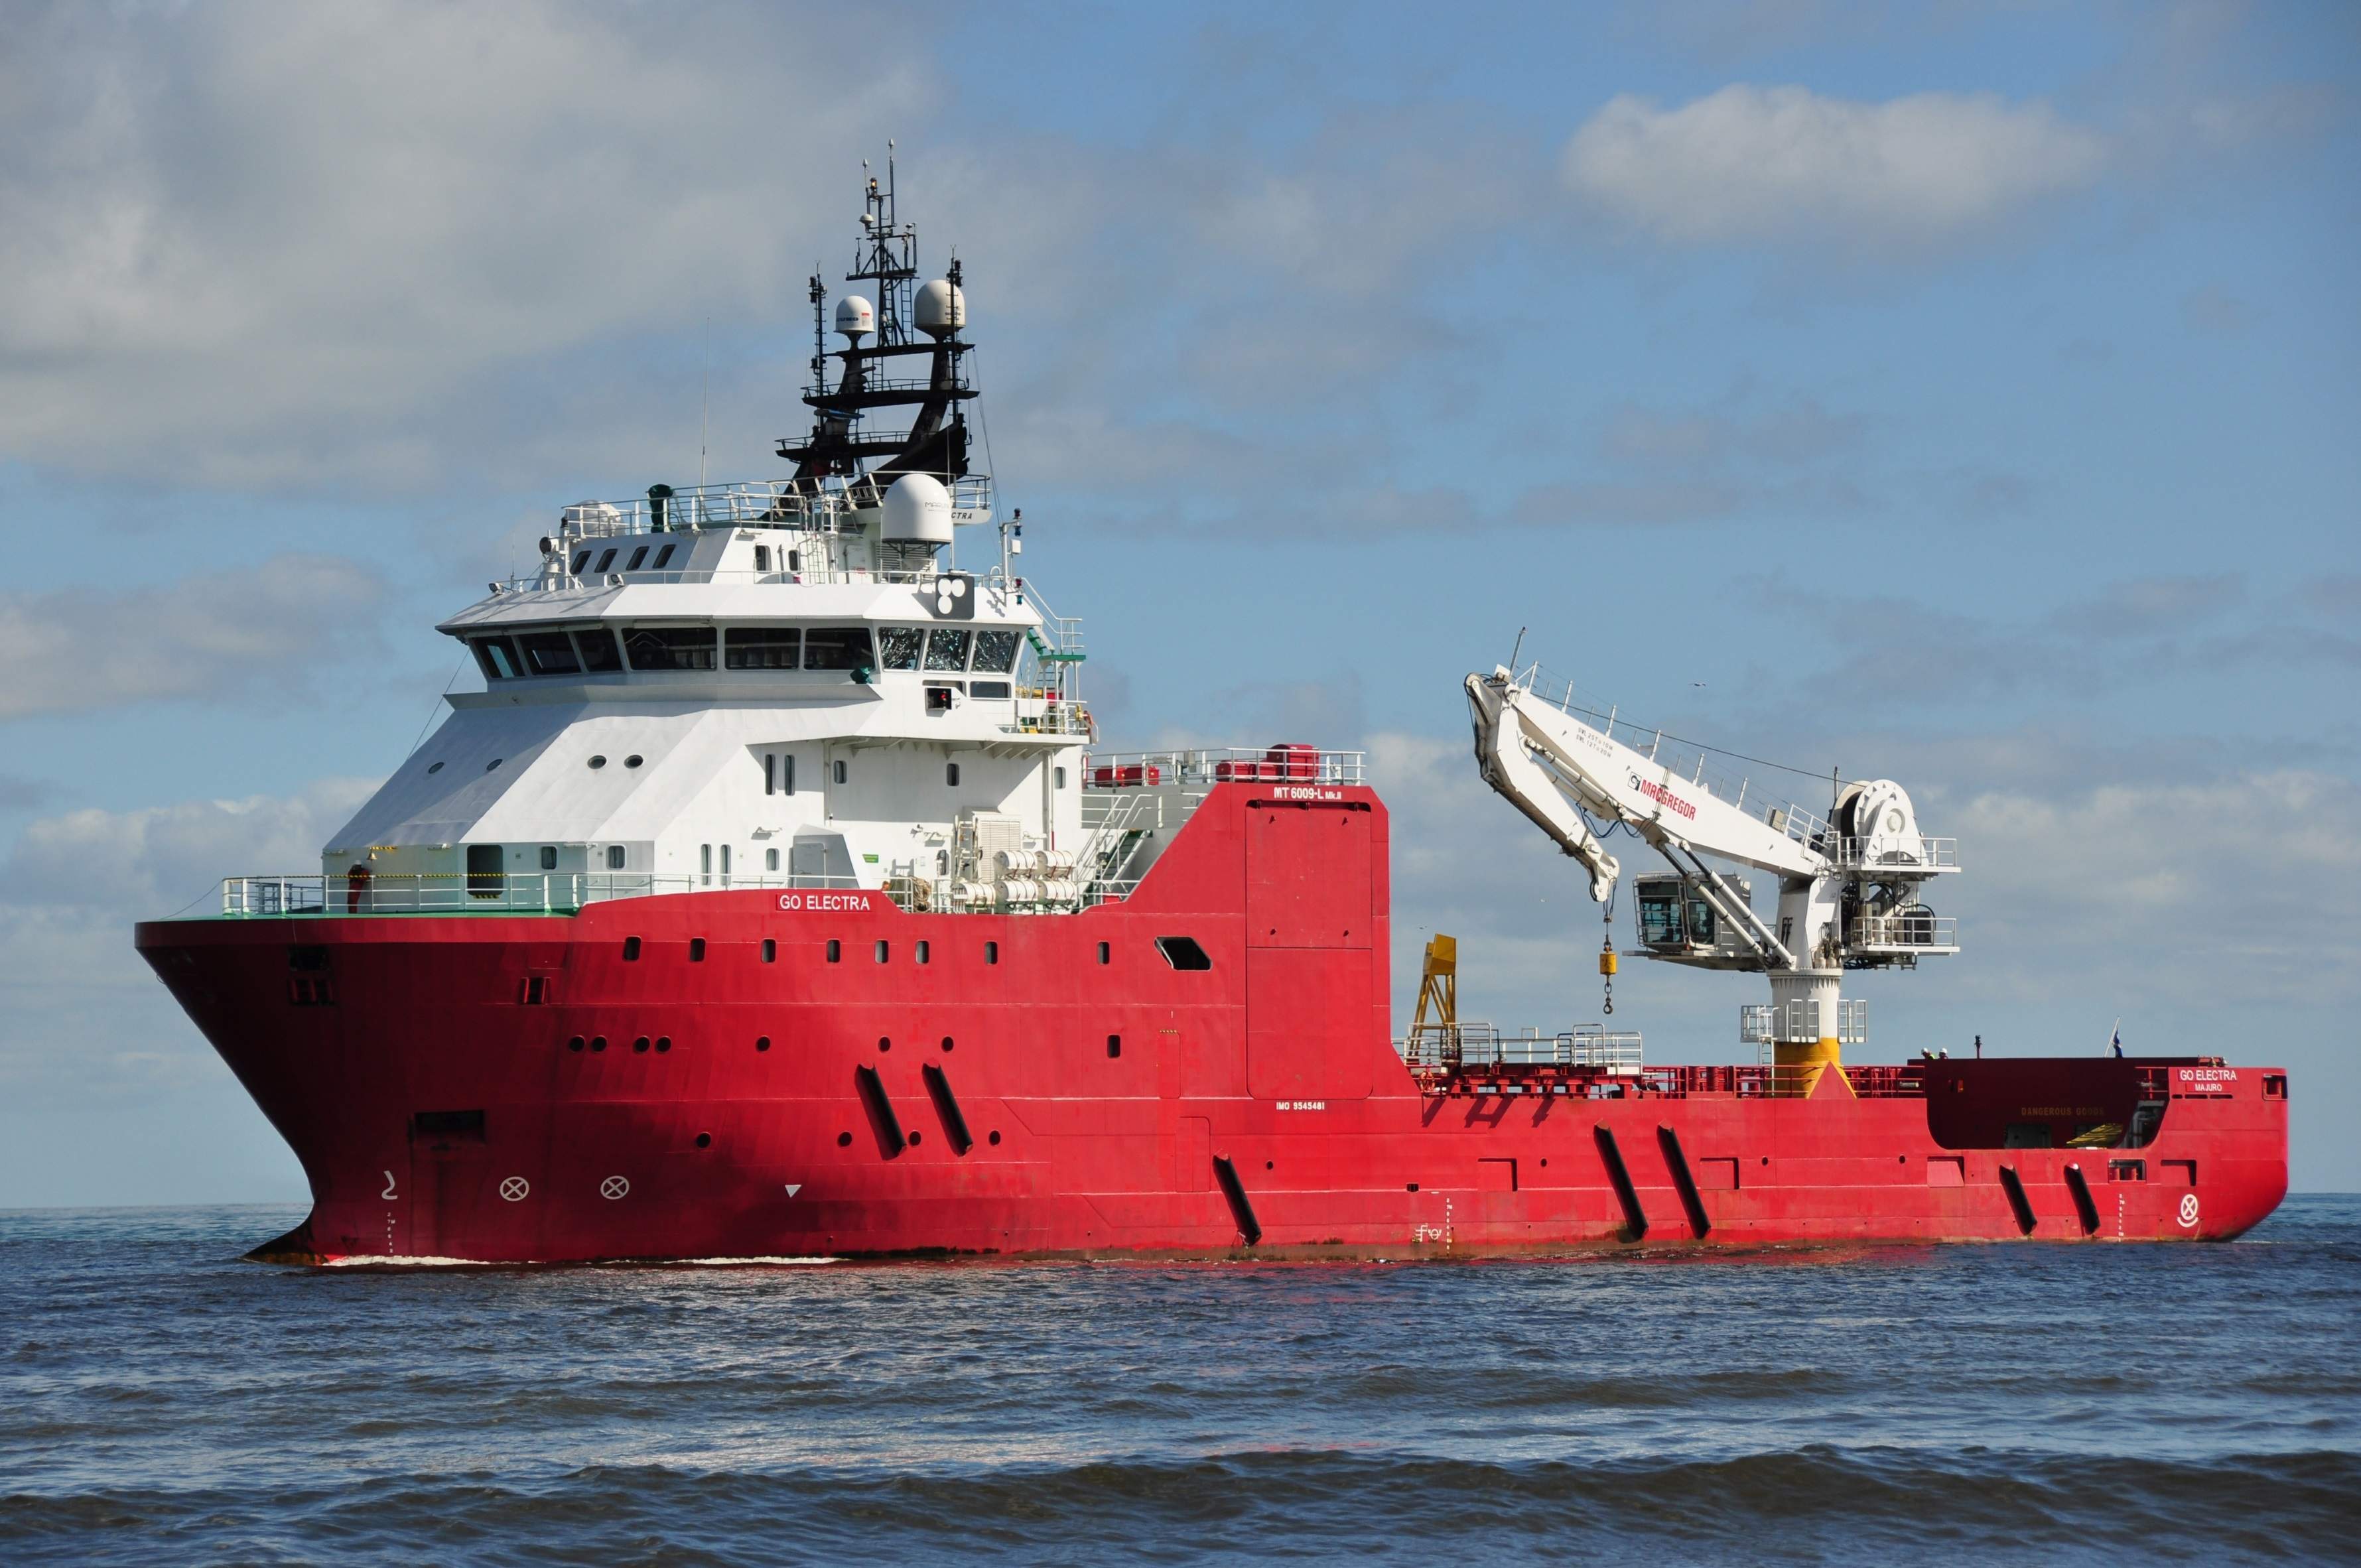 M2 Subsea completes North Sea field survey for Ithaca Energy